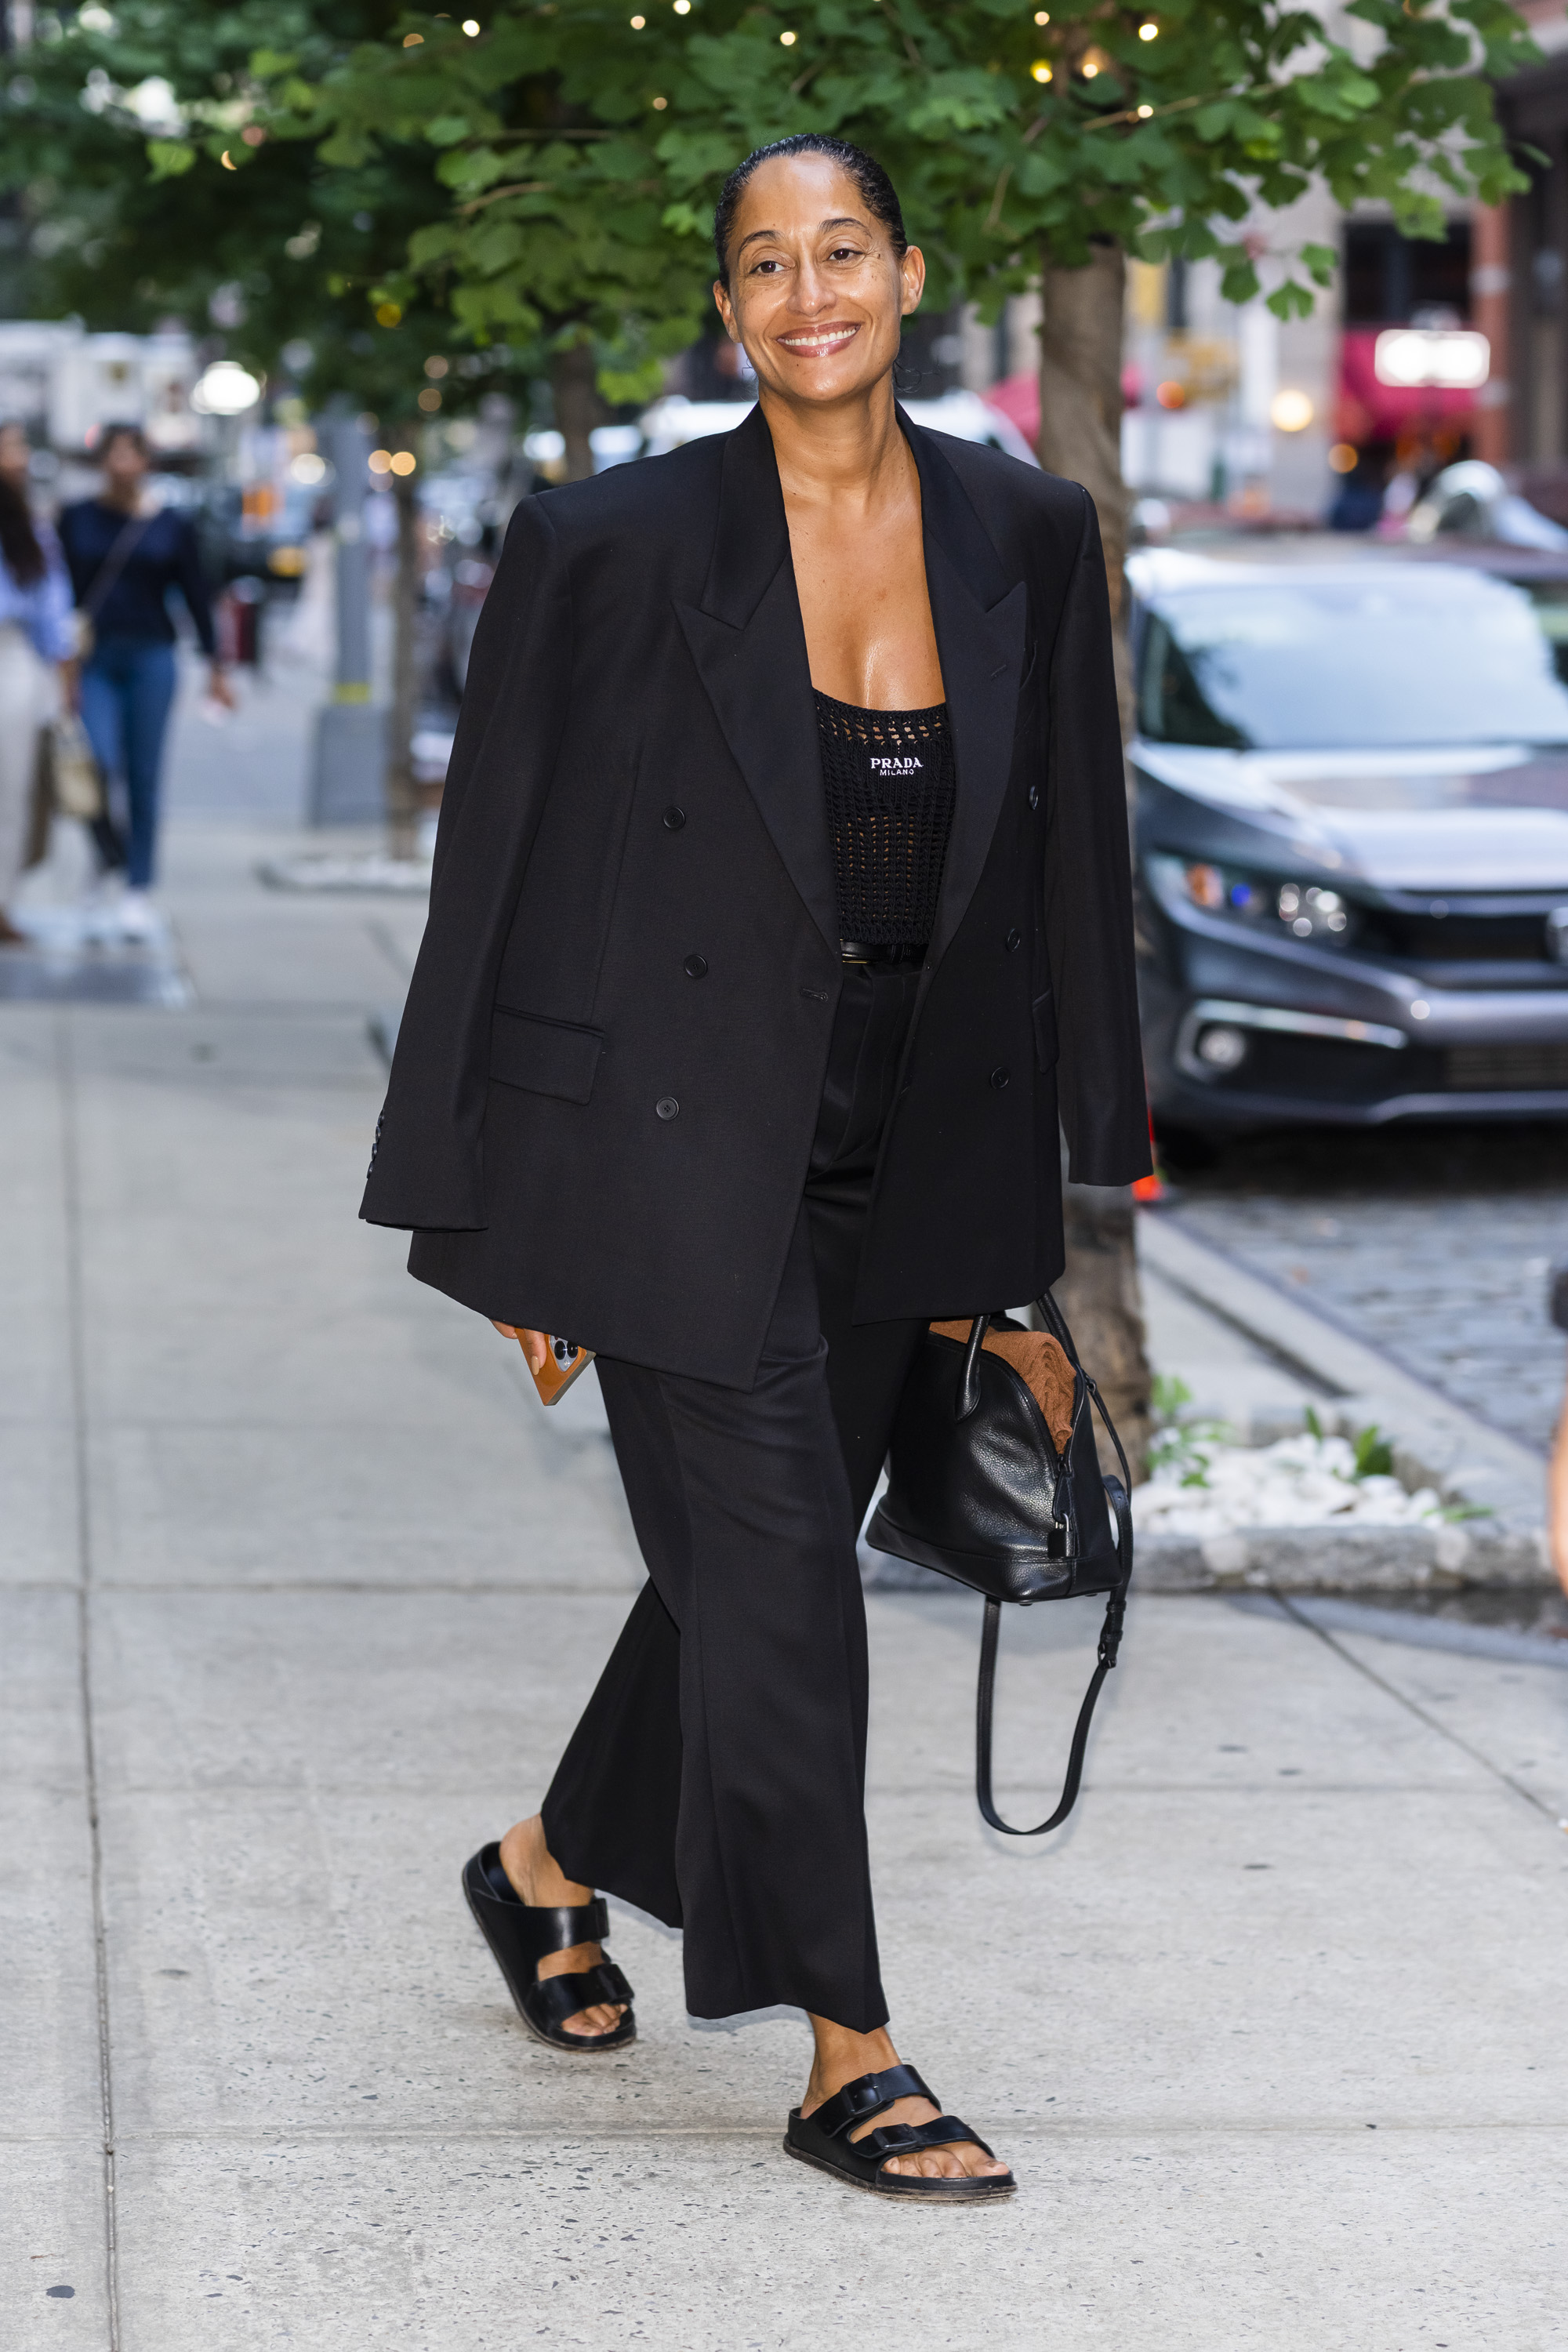 Tracee Ellis Ross is seen in SoHo on August 7, 2022 in New York City.